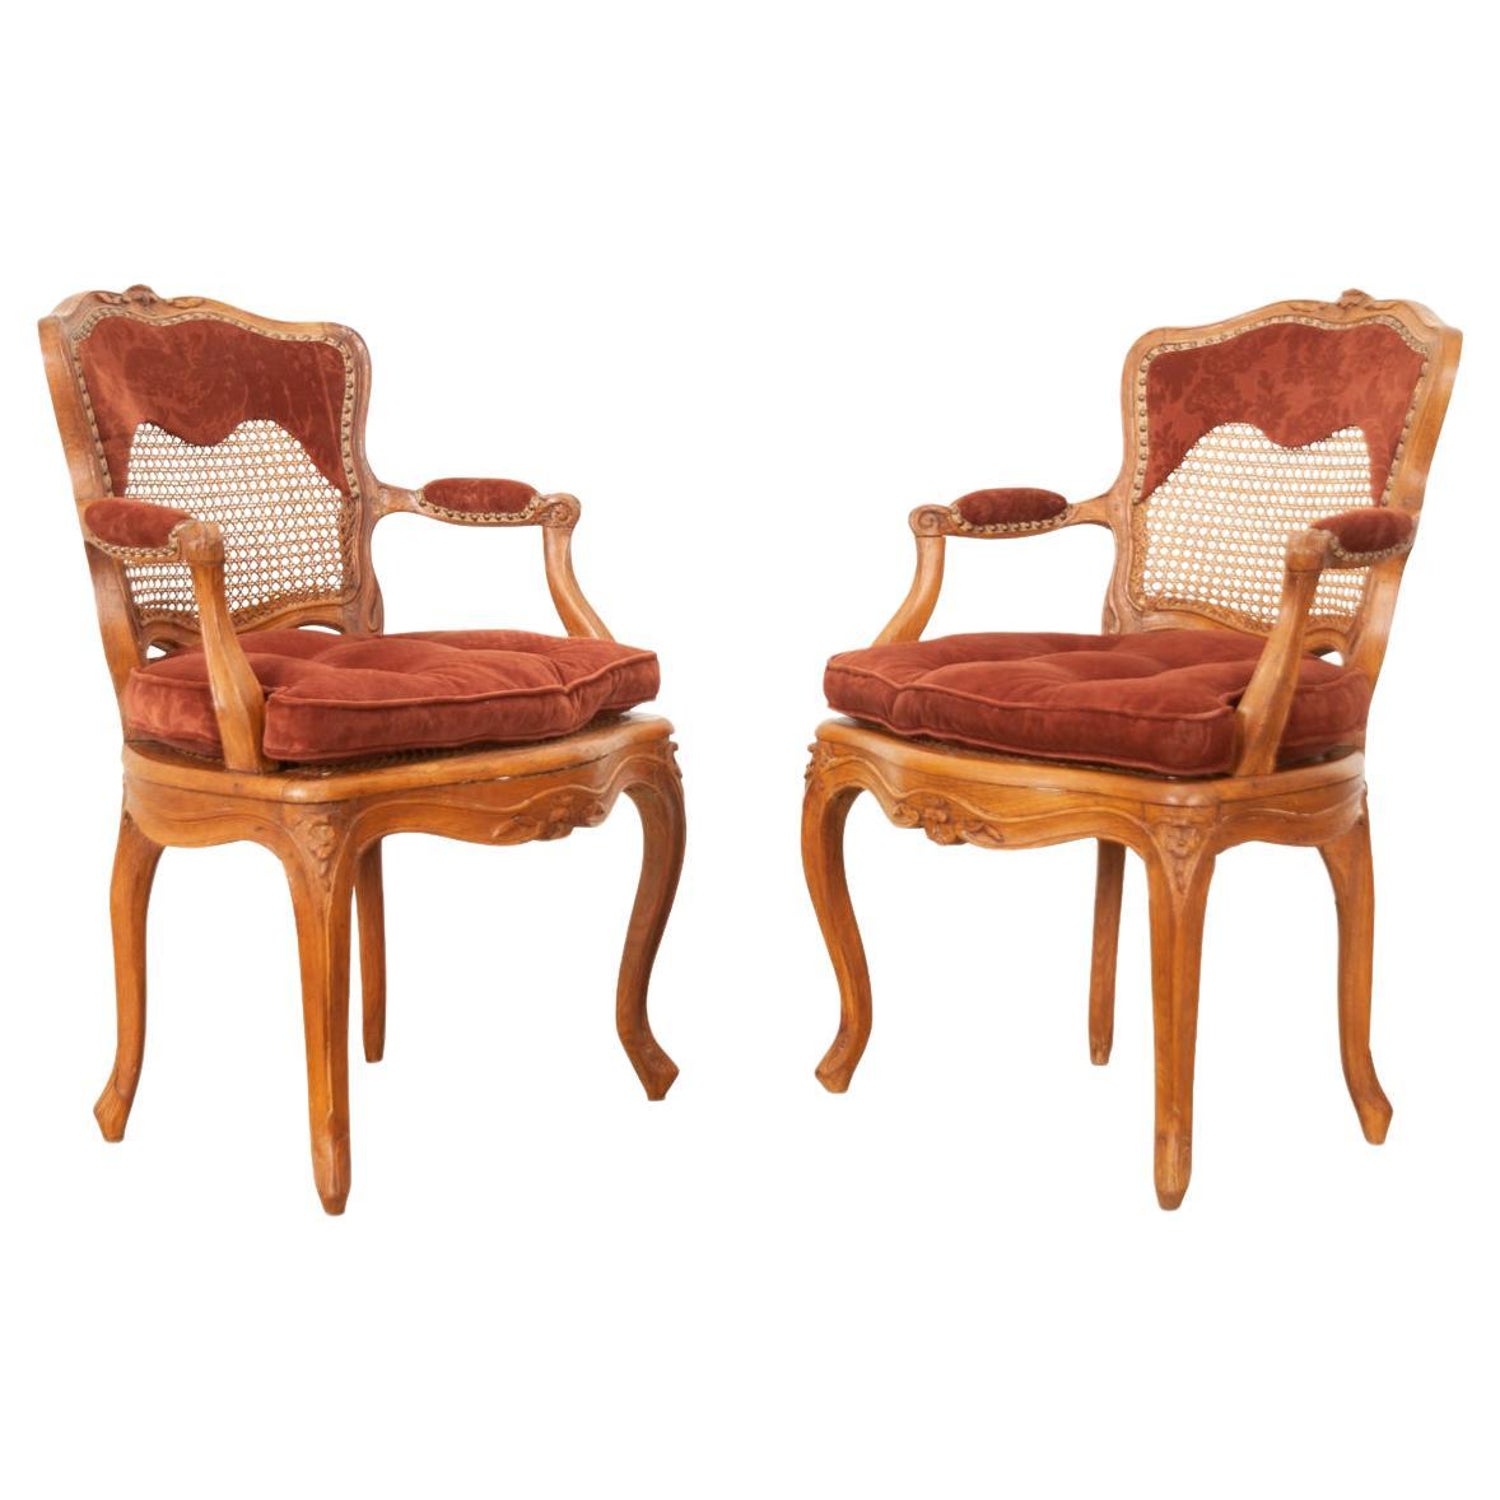 19th Century Rococo Revival Antique Bergere Armchair in Louis XV Taste at  1stDibs